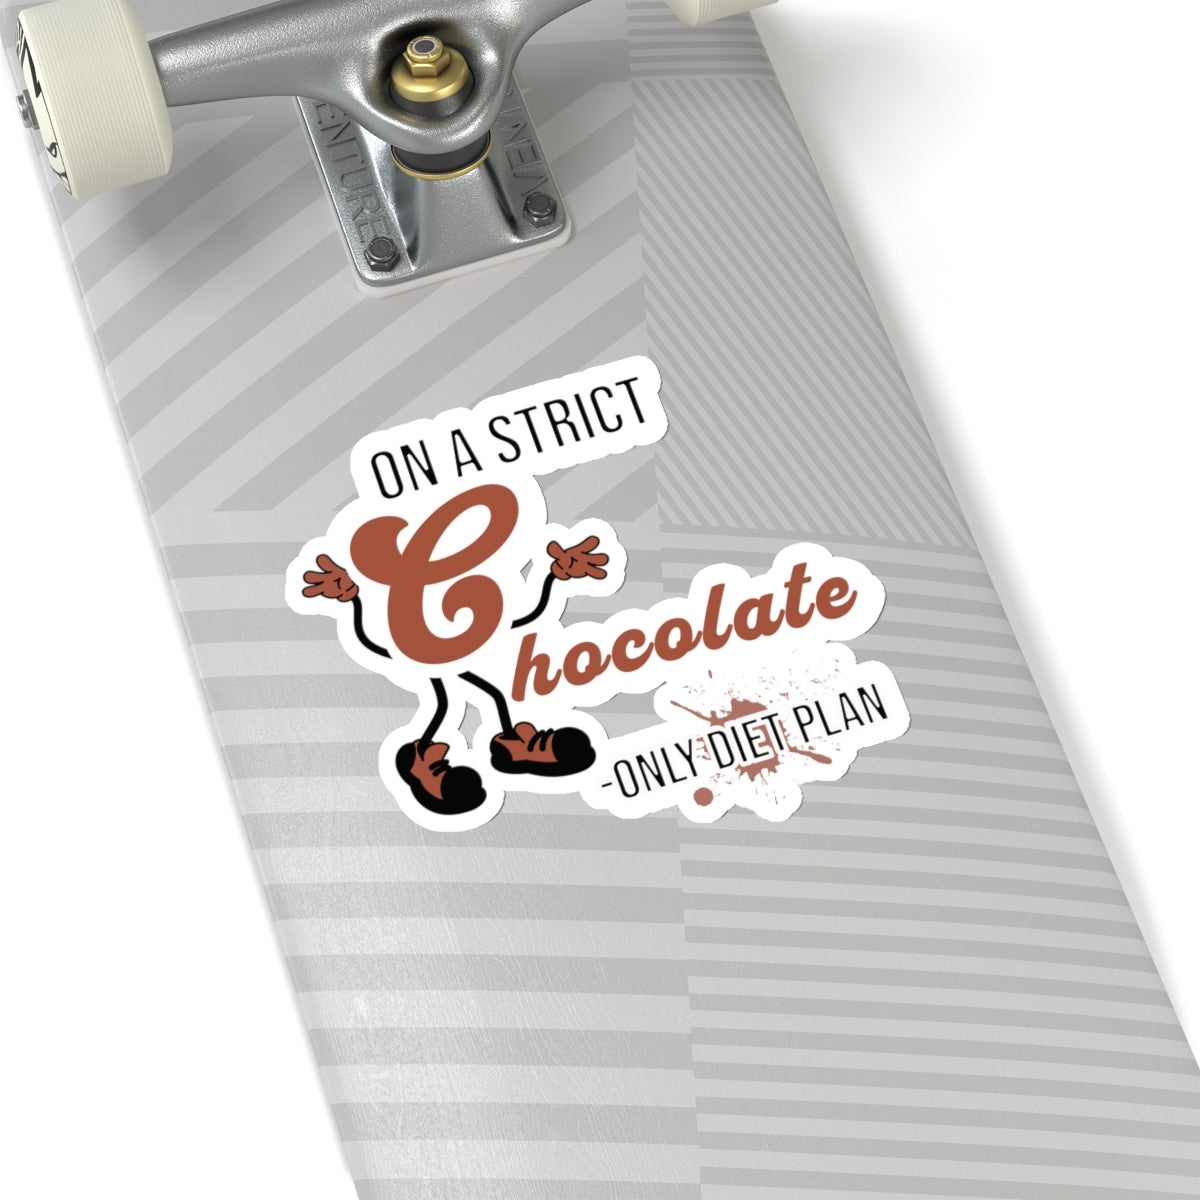 On A Strict Chocolate Only Diet Plan Funny Quote Kiss-Cut Stickers-Paper products-mysticalcherry